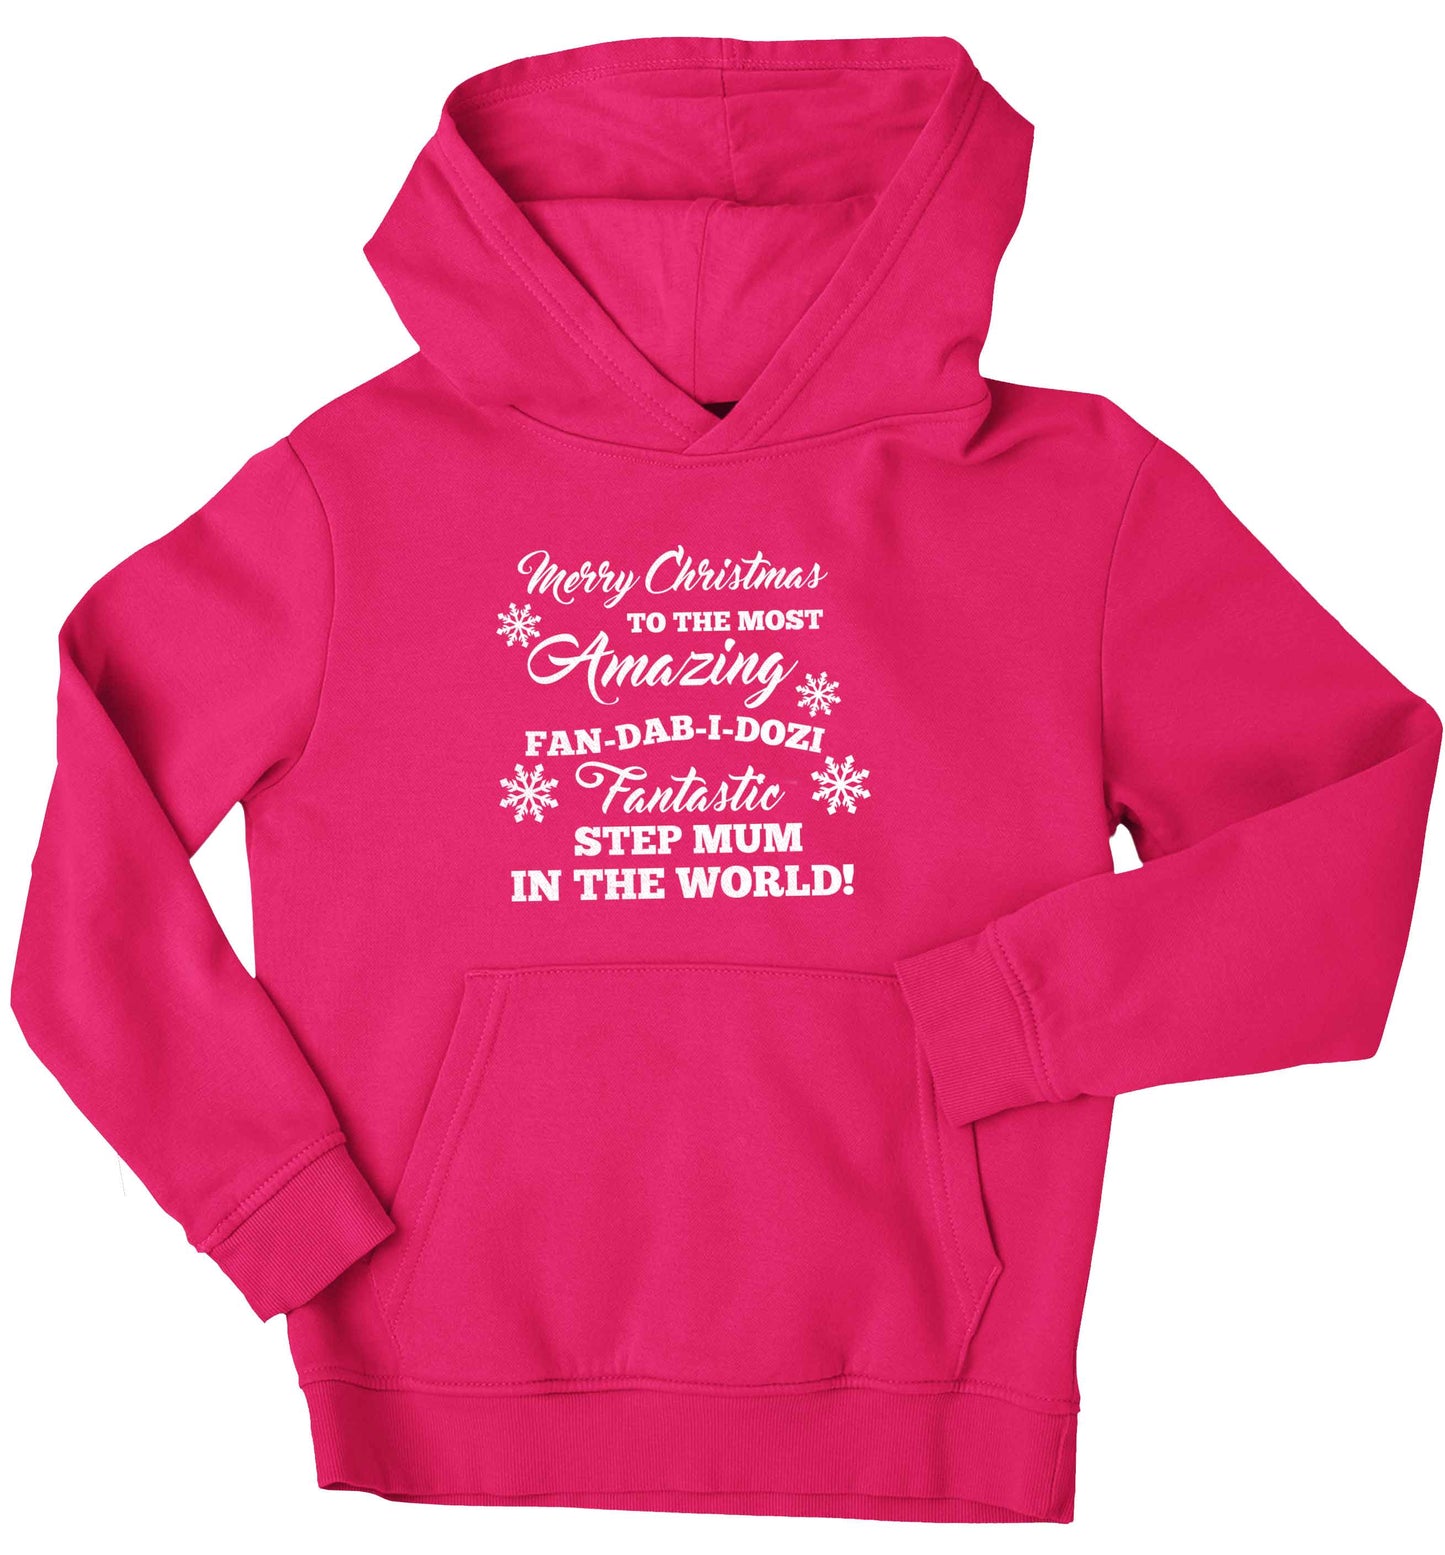 Merry Christmas to the most amazing fan-dab-i-dozi fantasic Step Mum in the world children's pink hoodie 12-13 Years